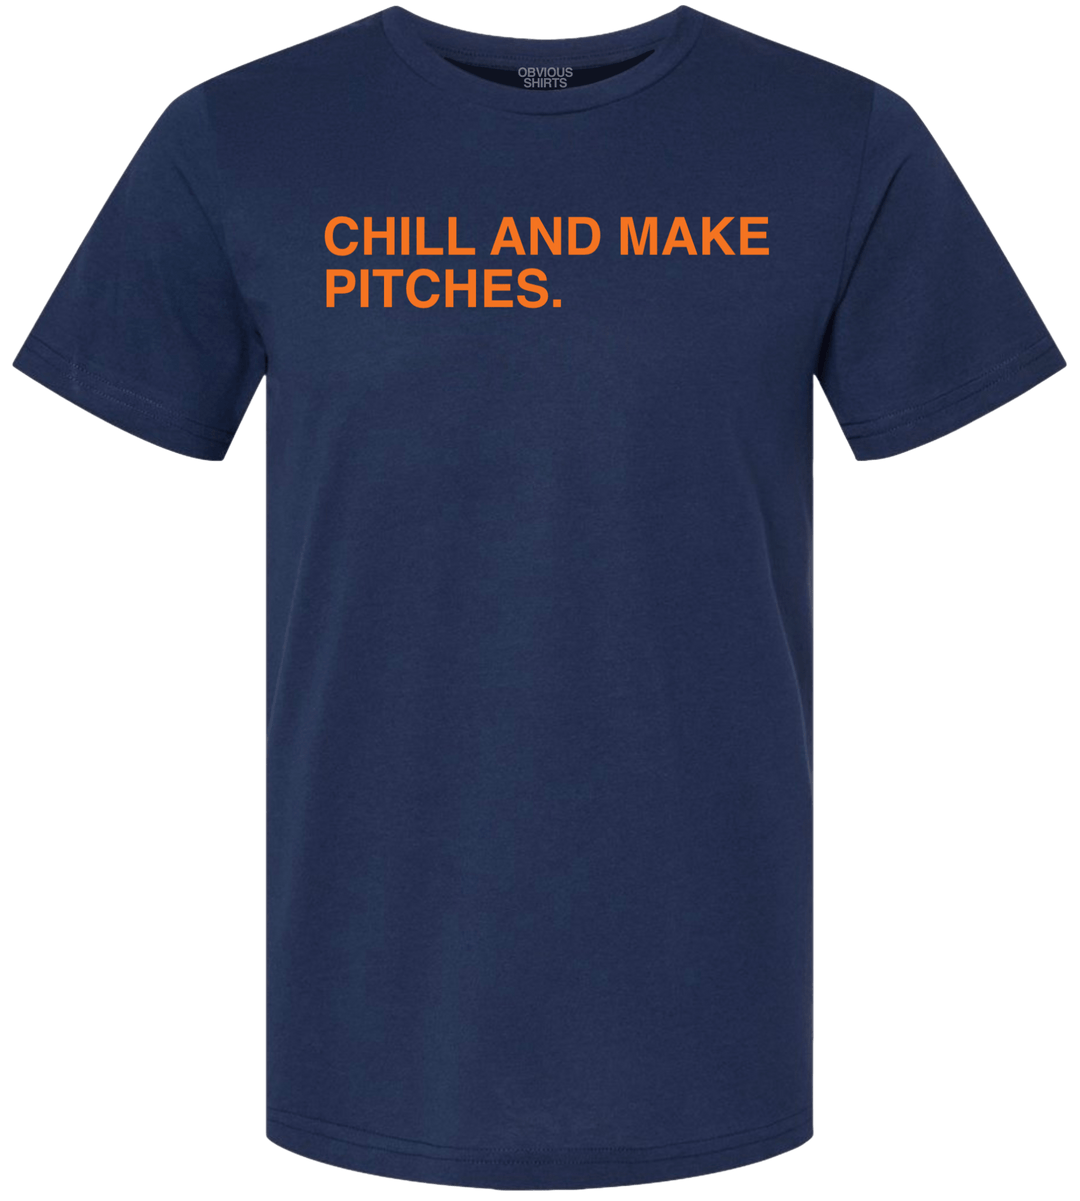 CHILL AND MAKE PITCHES. - OBVIOUS SHIRTS